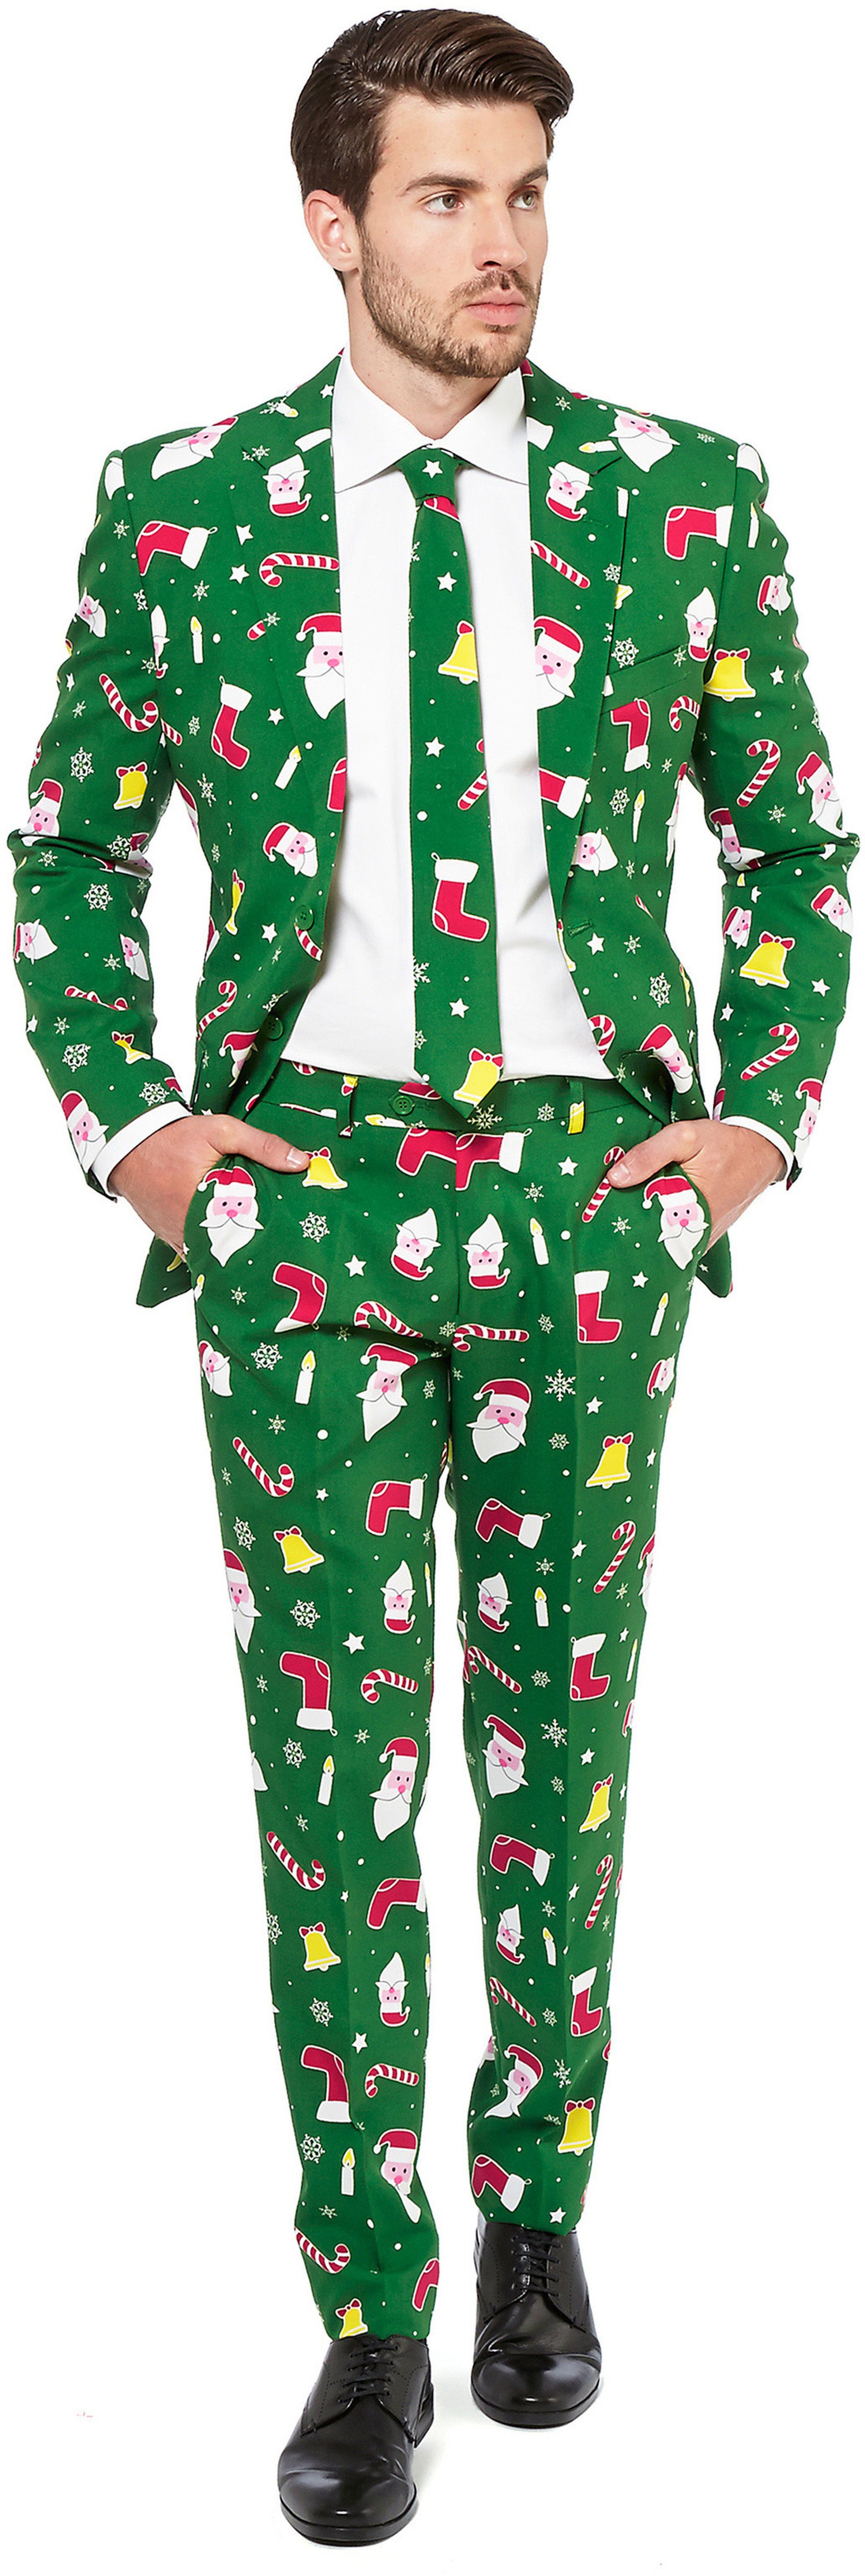 OppoSuits Costume Père Noël Rouge Vert taille 60